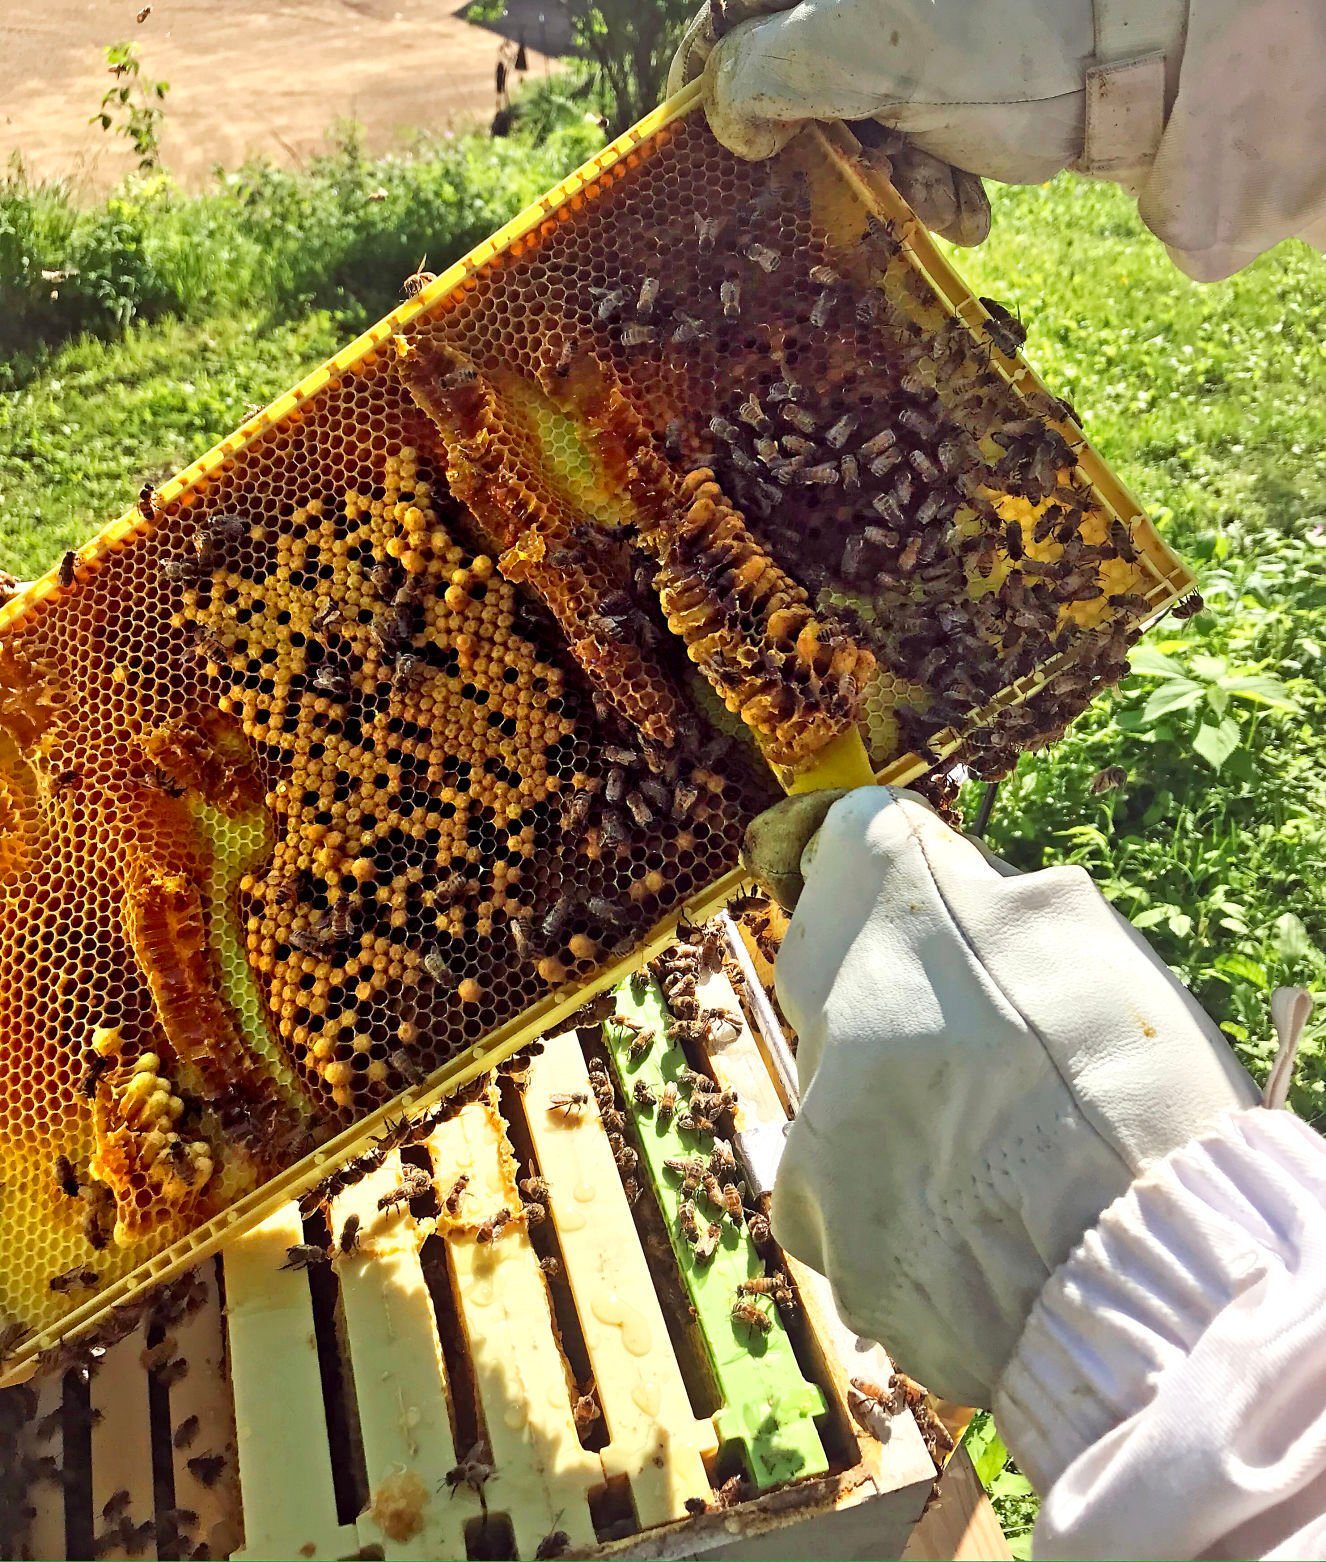 Tony Zenner cleans a honeycomb from frames in a hive at Timber Range Farm in Durango, Iowa.    PHOTO CREDIT: Contributed